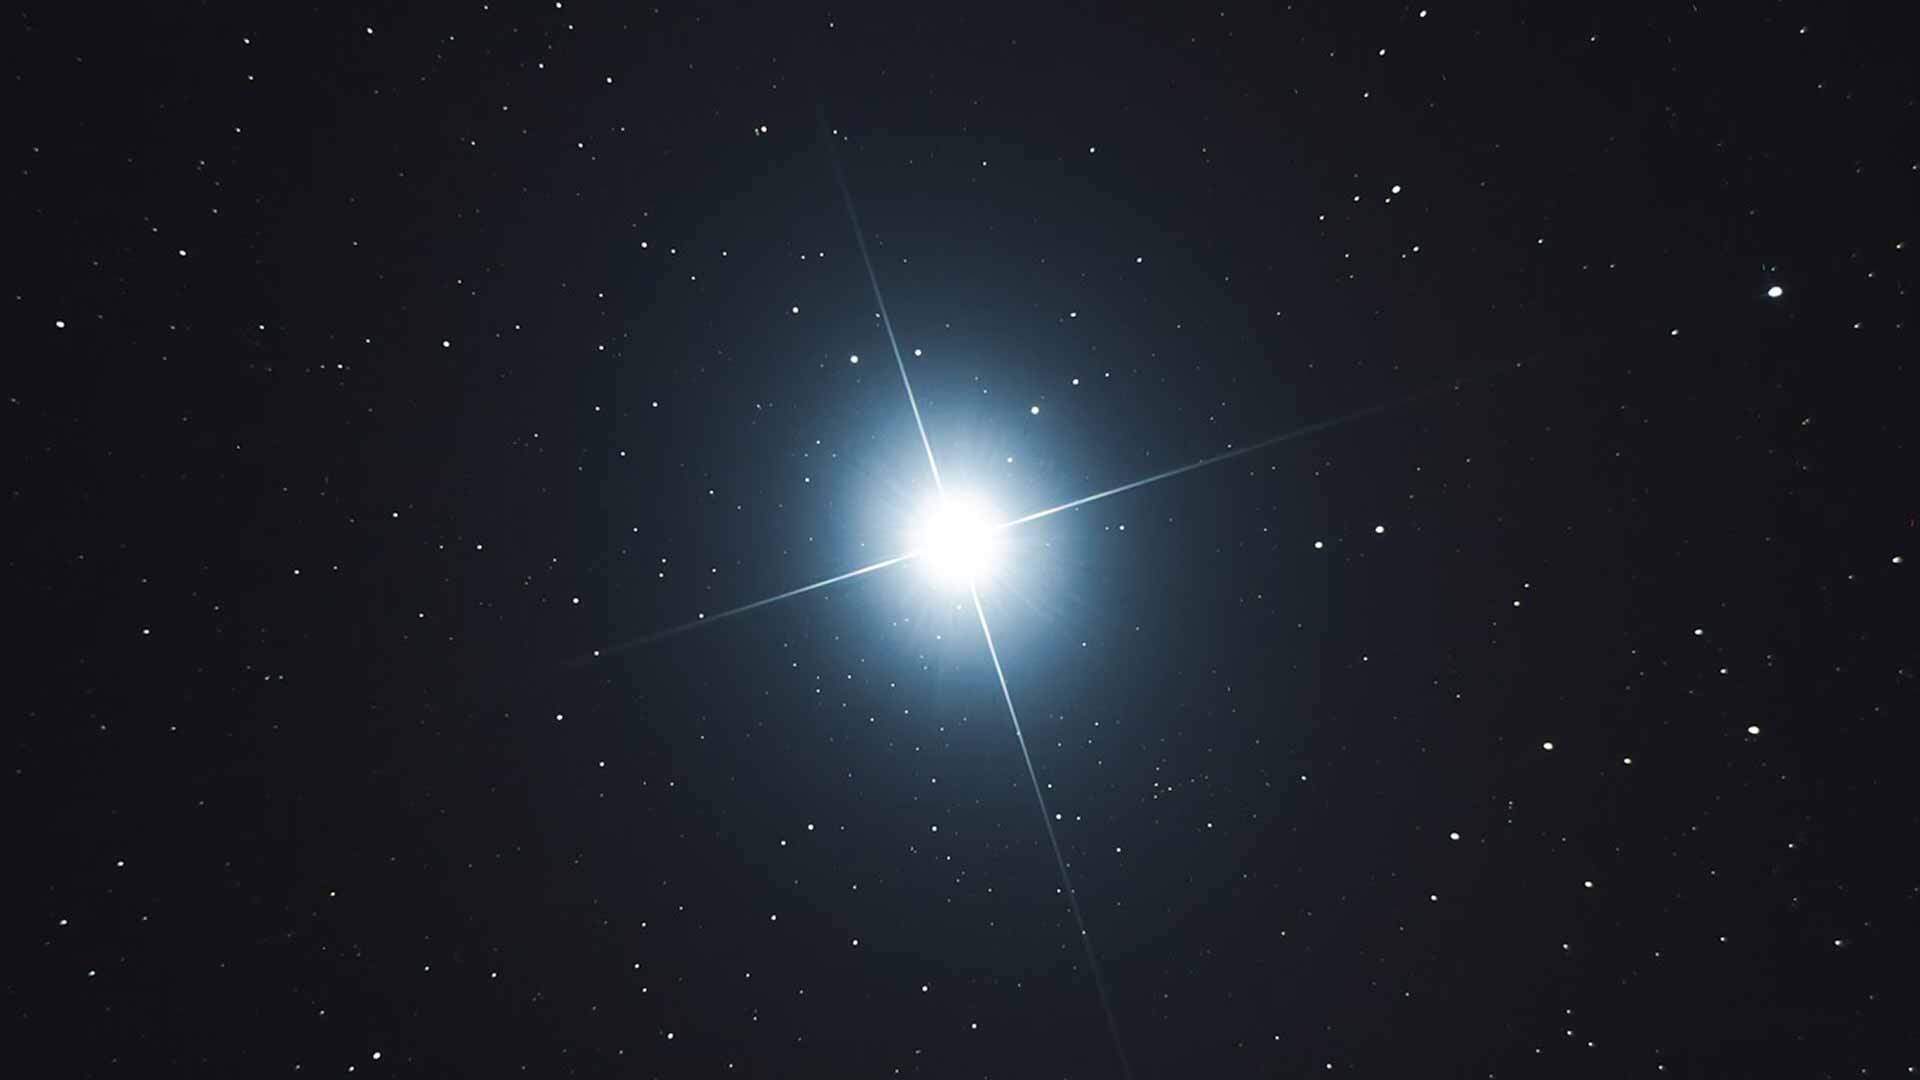 What is the brightest star in the sky?